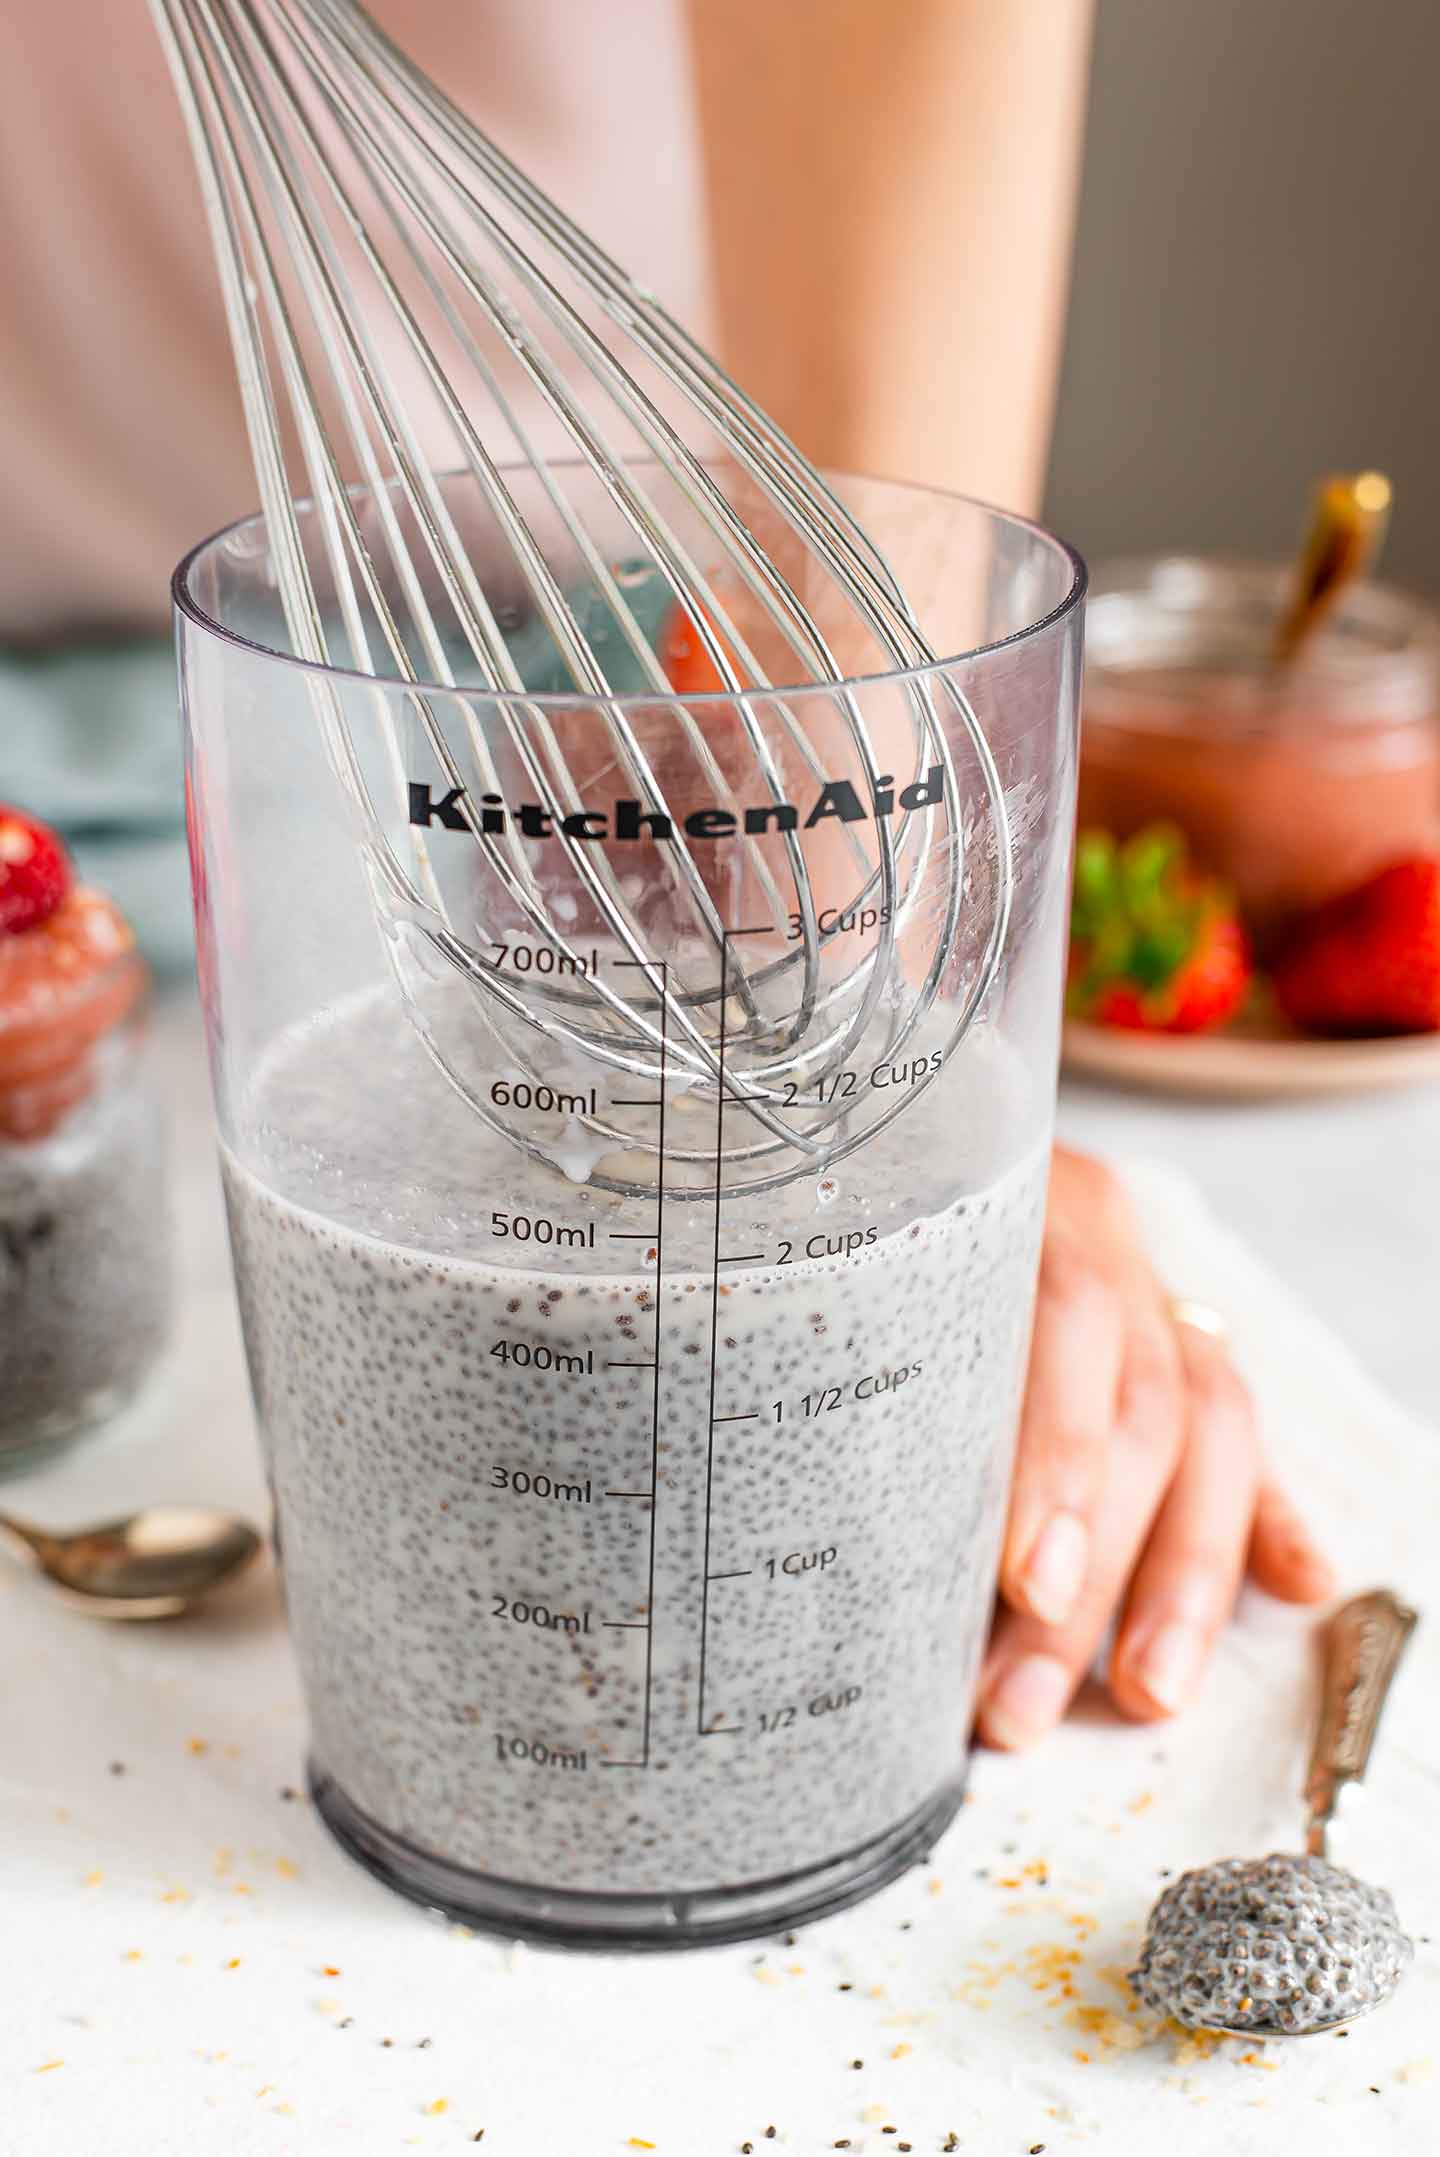 Side view of the seeds and milk being whisked in a clear container. Strawberries and jam are visible in the background.